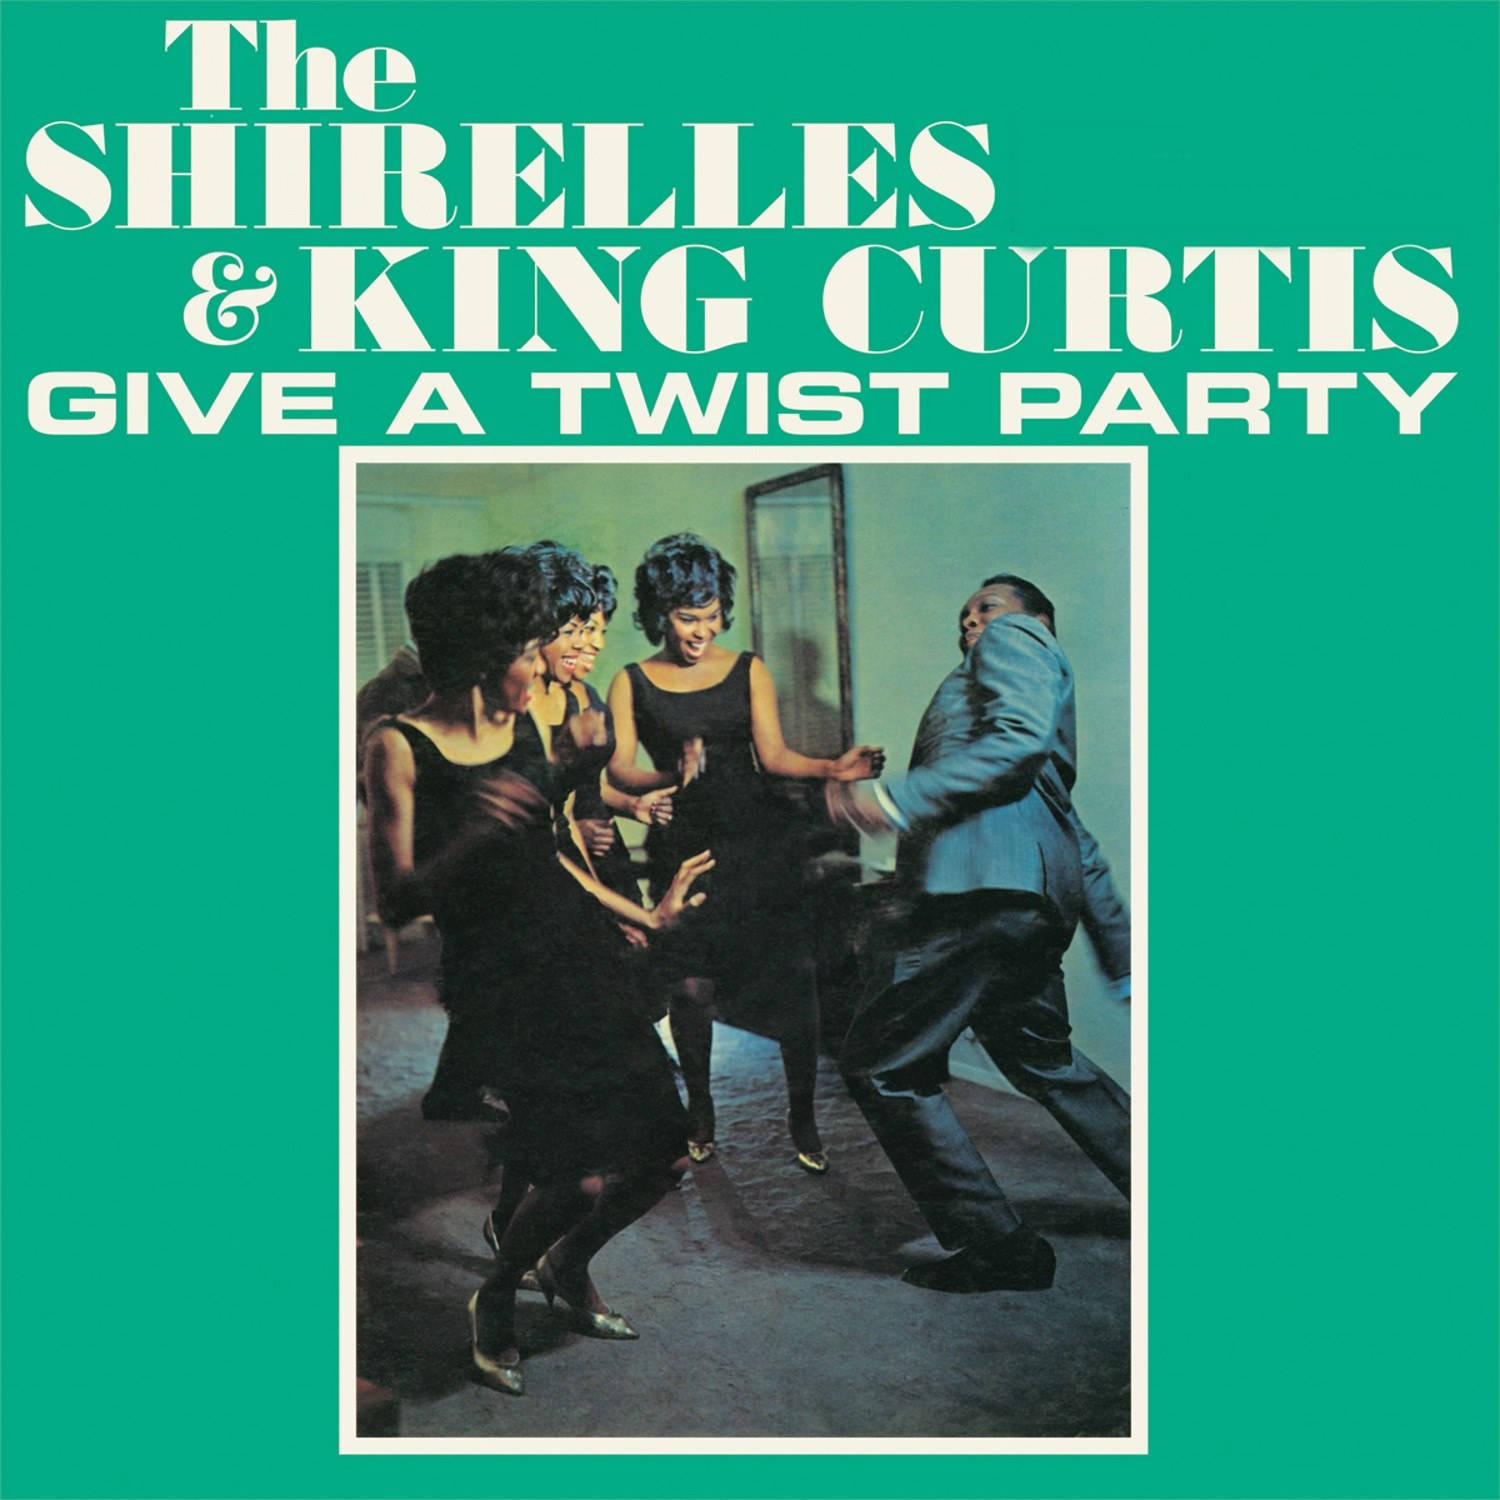 King Curtis And The Shirelles Album Cover Wallpaper